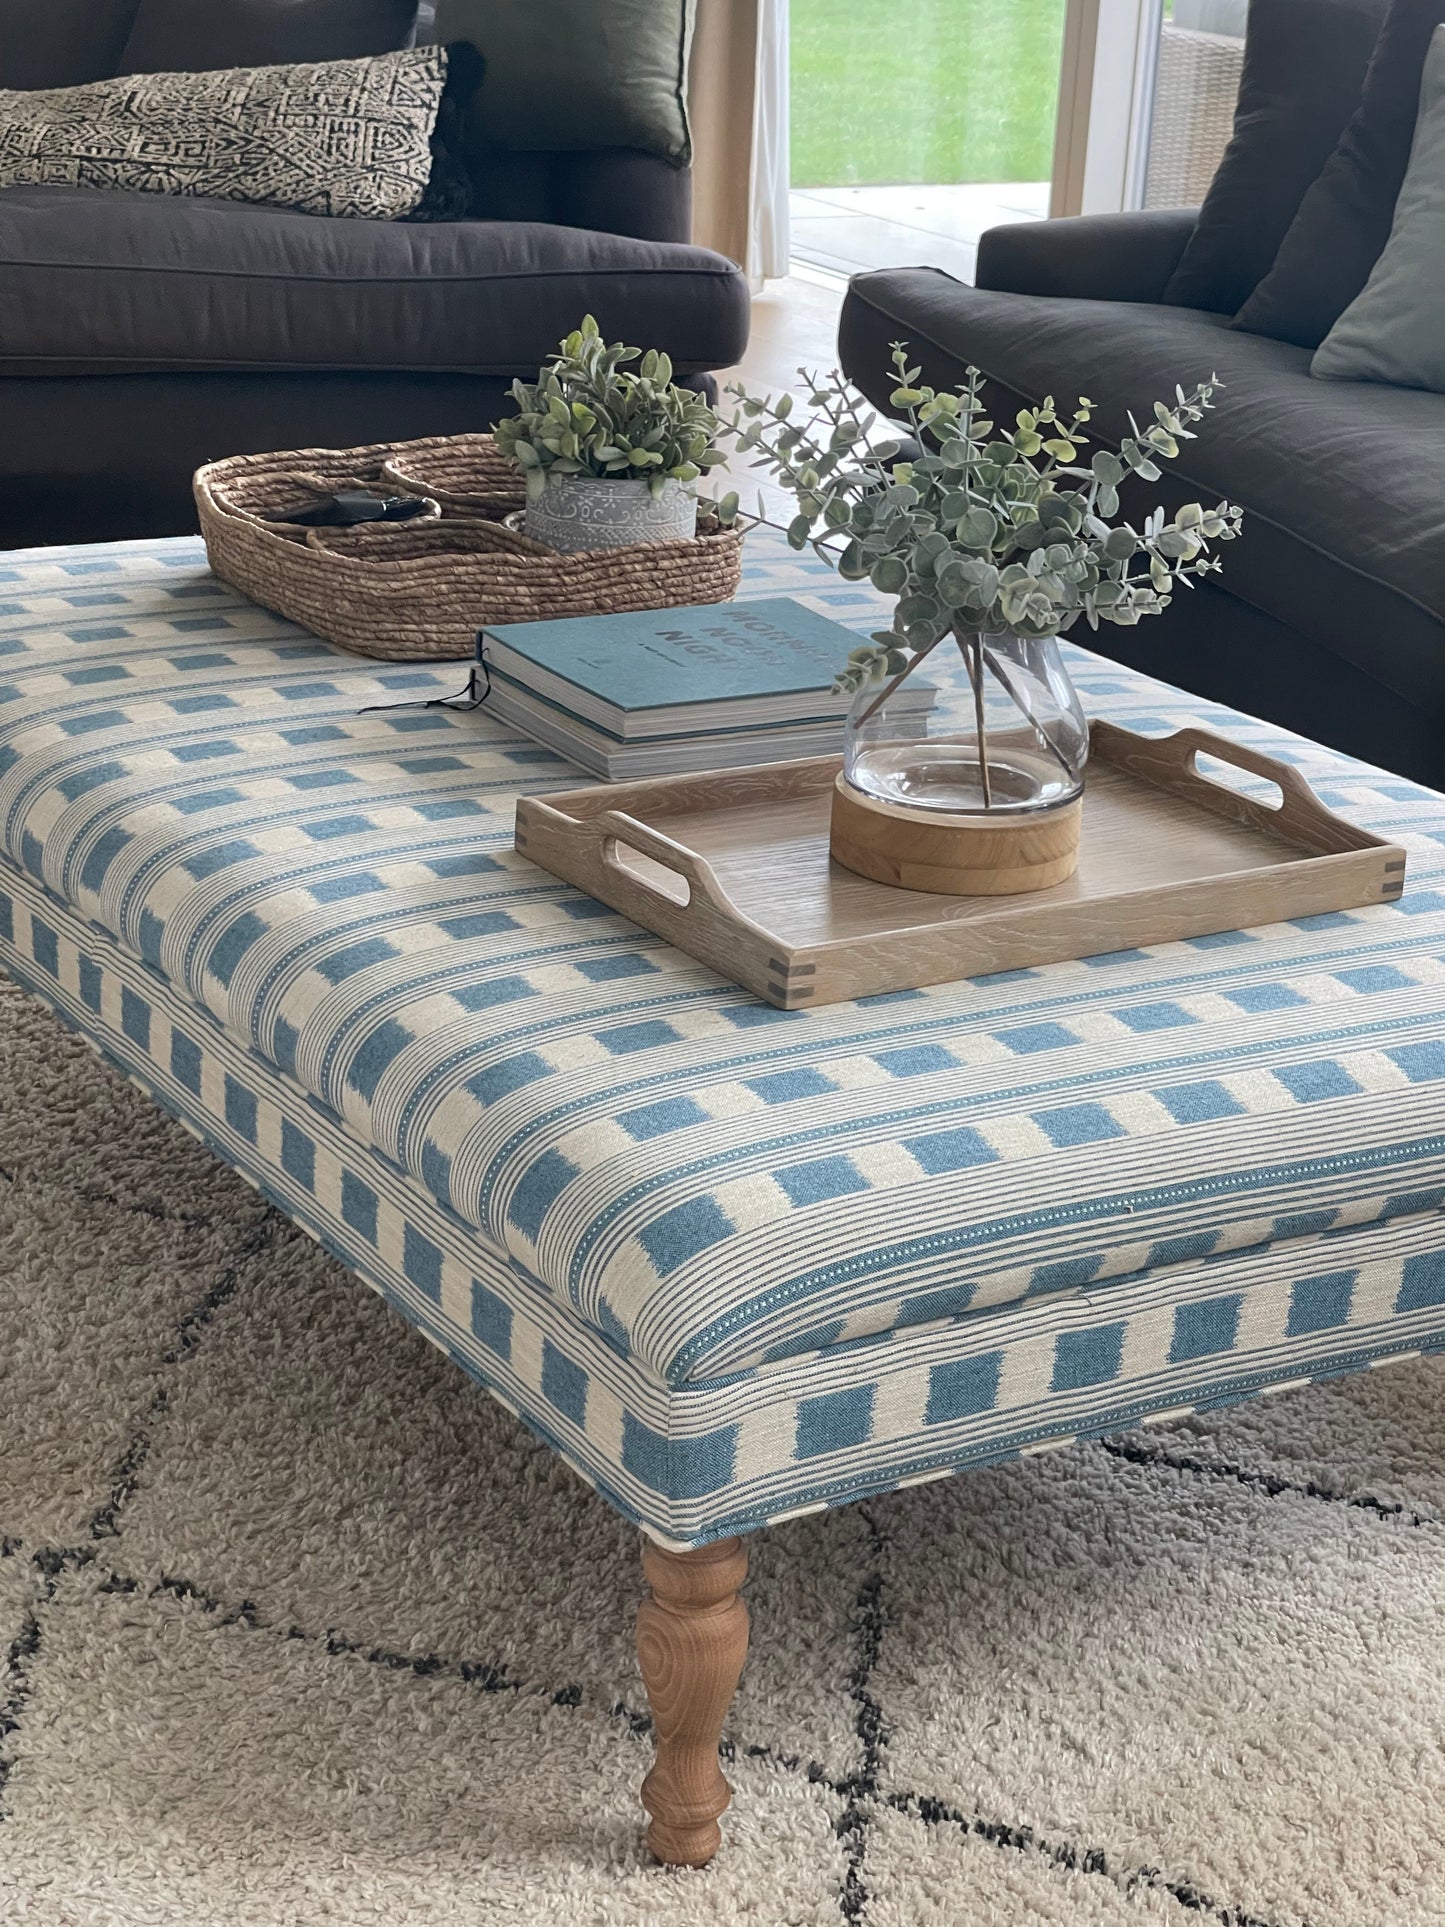 XL Bryher Ottoman In Any Fabric - The House Upstairs